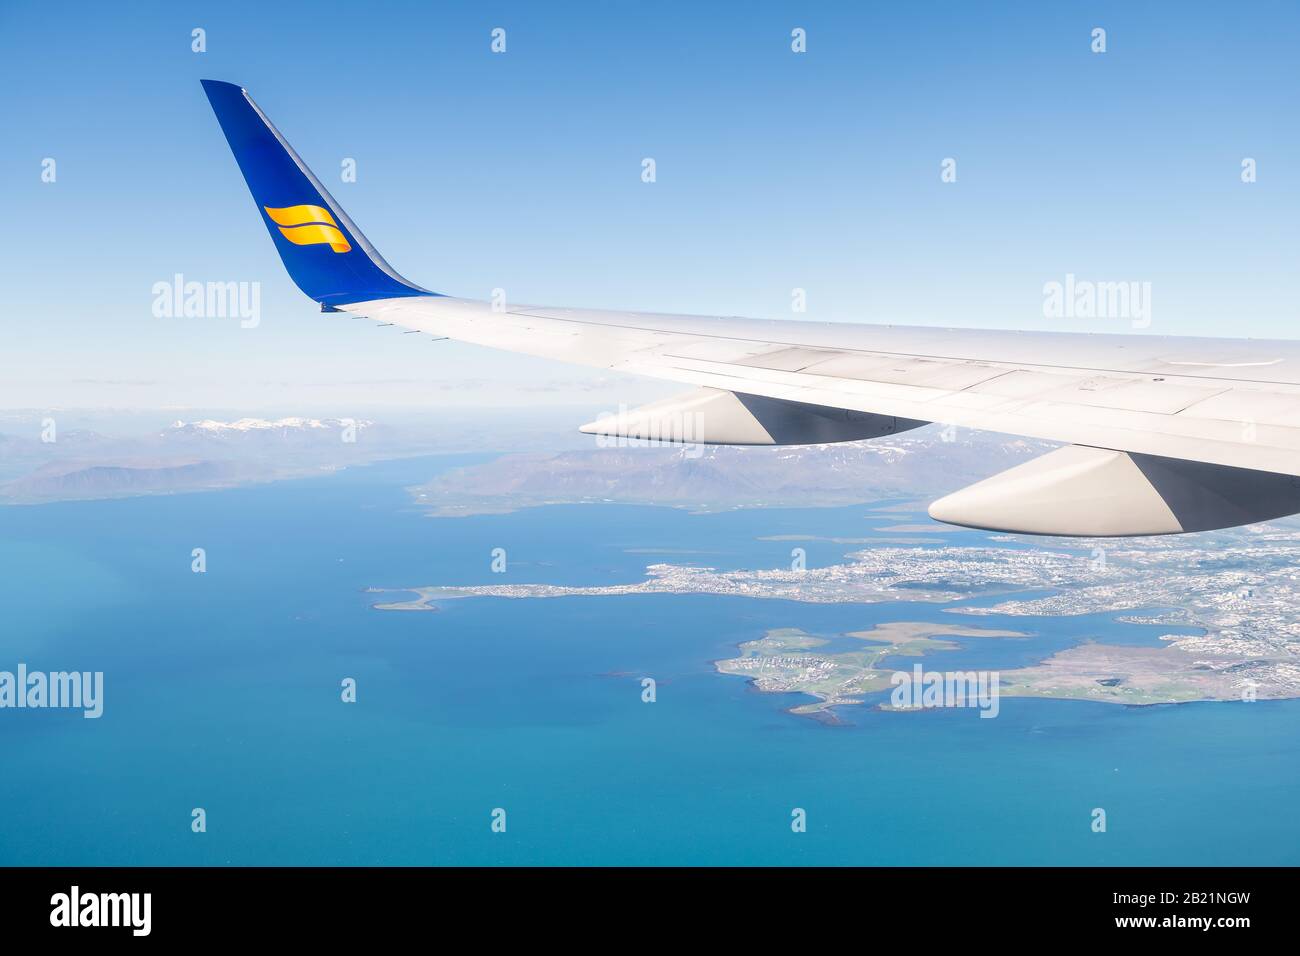 Keflavik, Iceland - June 20, 2018: Icelandair plane in blue sky with view from window high angle view over Atlantic Arctic ocean and city, mountains i Stock Photo